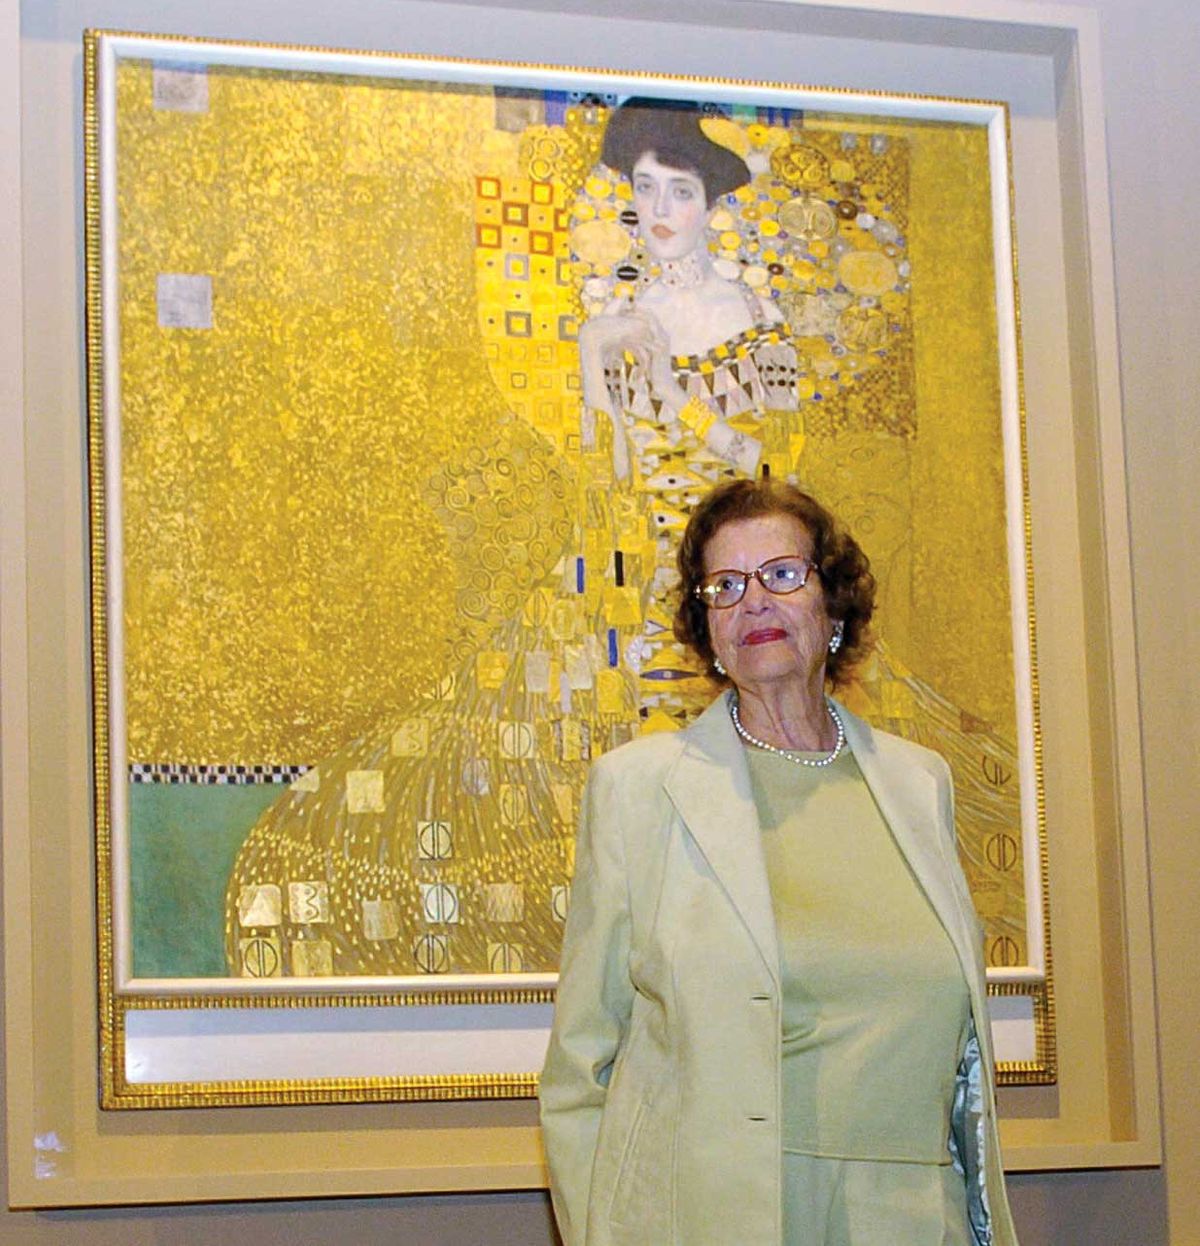 Maria Altmann took on the Austrian government in her bid to have Klimt’s 1907 painting Adele Bloch-Bauer I and other works looted by the Nazis returned to her family Photo: Chris Pizzello